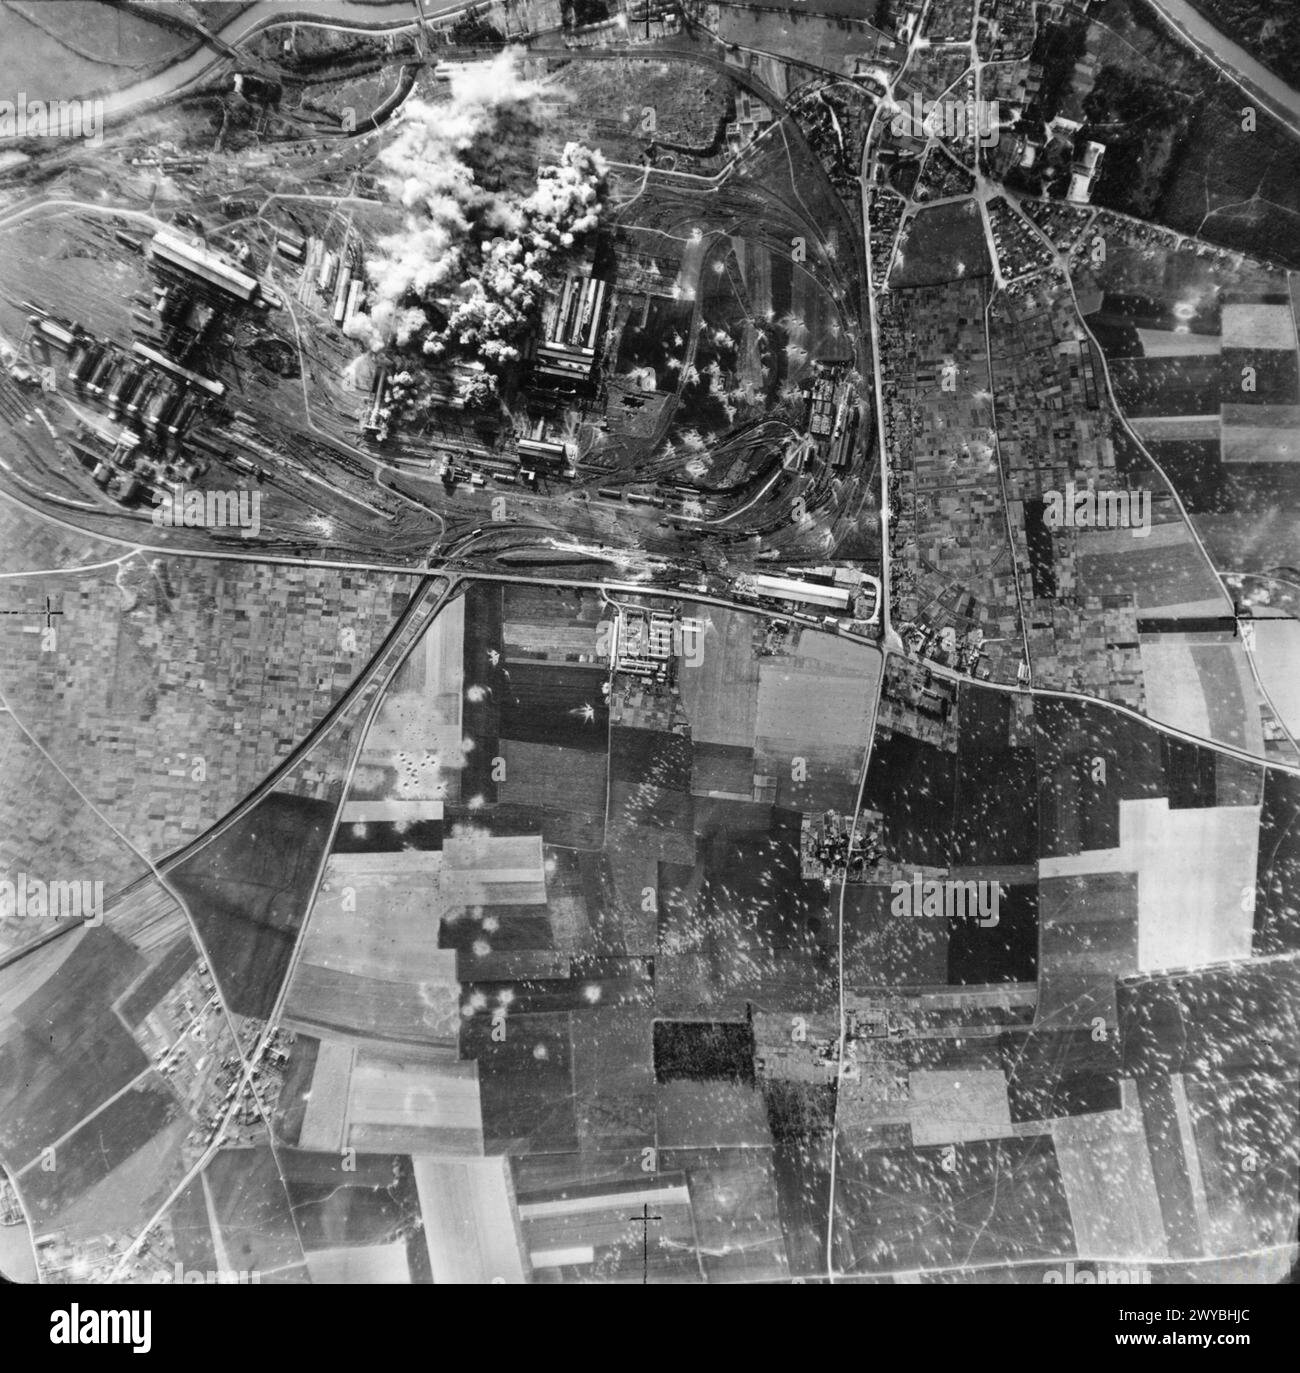 ROYAL AIR FORCE: 2ND TACTICAL AIR FORCE, 1943-1945. - Bombs explode on the Colombelles steel works, east of Caen, during the attack by No. 2 Group on this German strongpoint. 48 North American Mitchells and 24 Douglas Bostons dropped a mixed load of 284 500-lb bombs and 48 1,000-lb bombs on the target. The Orne river can be seen to the right. , Royal Air Force, Group, 226, Royal Air Force, 2 Group, Royal Air Force, Maintenance Unit, 201 Stock Photo